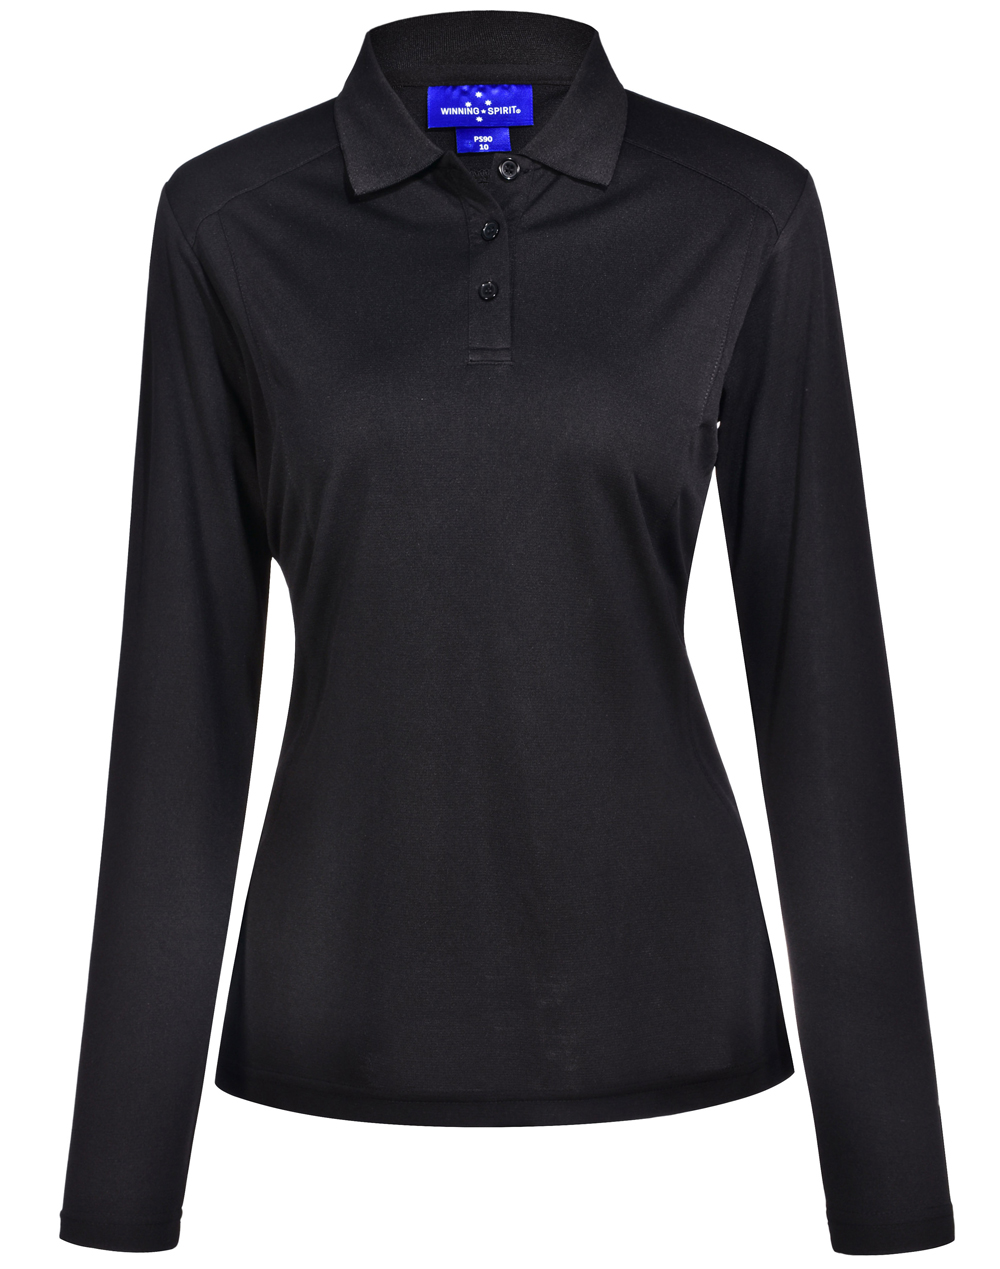 PS89 LUCKY BAMBOO LONG SLEEVE POLO Mens&Ladies